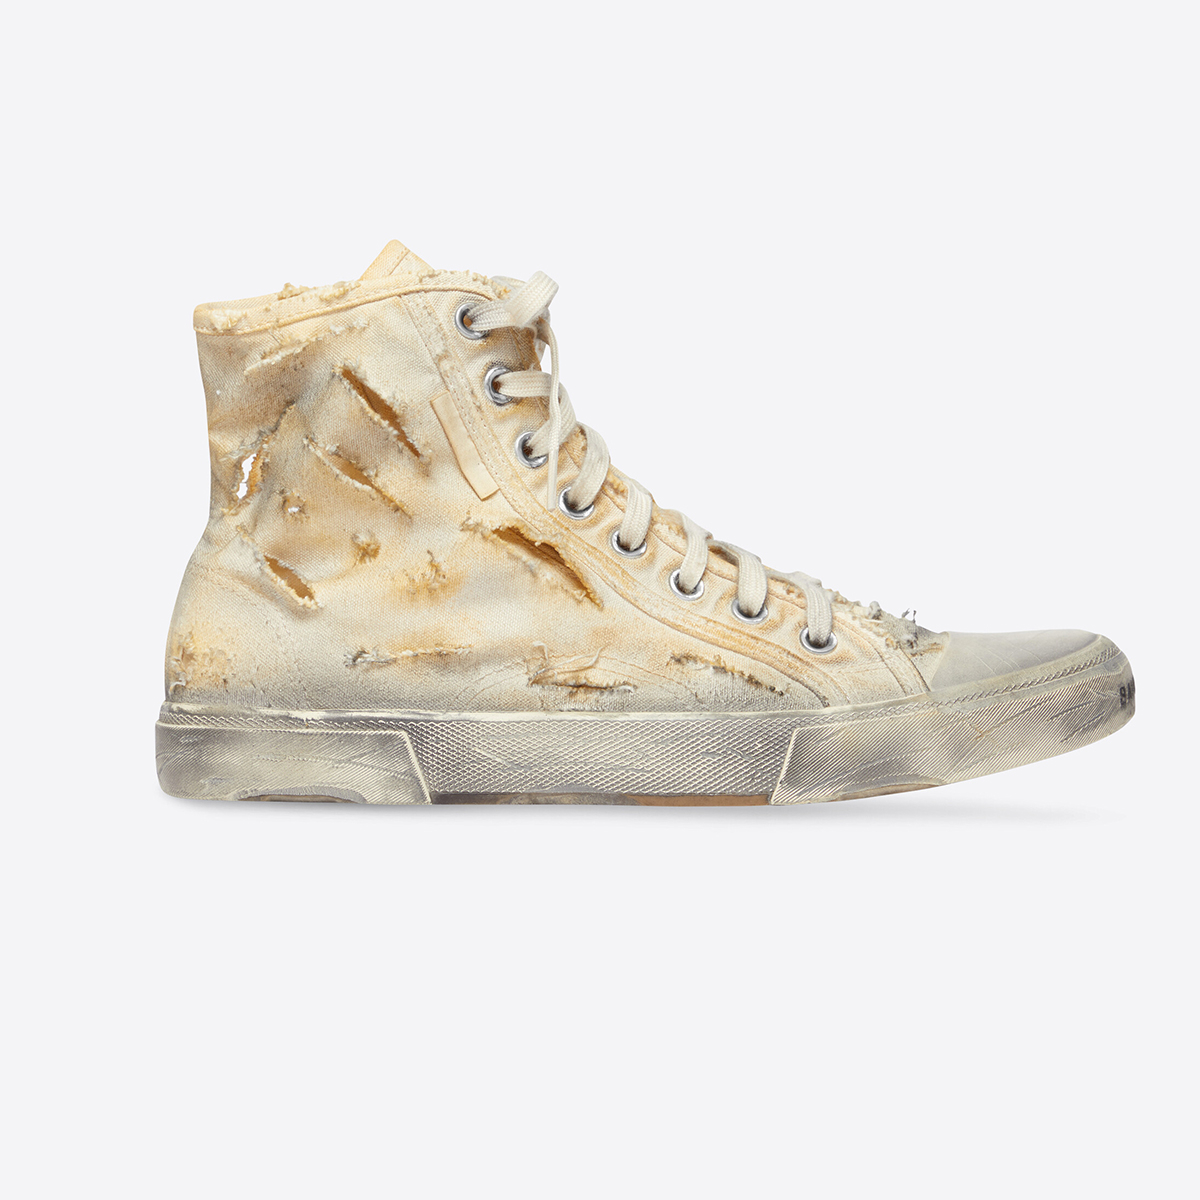 Balenciaga selling tattered sneakers for Ksh. 214,785